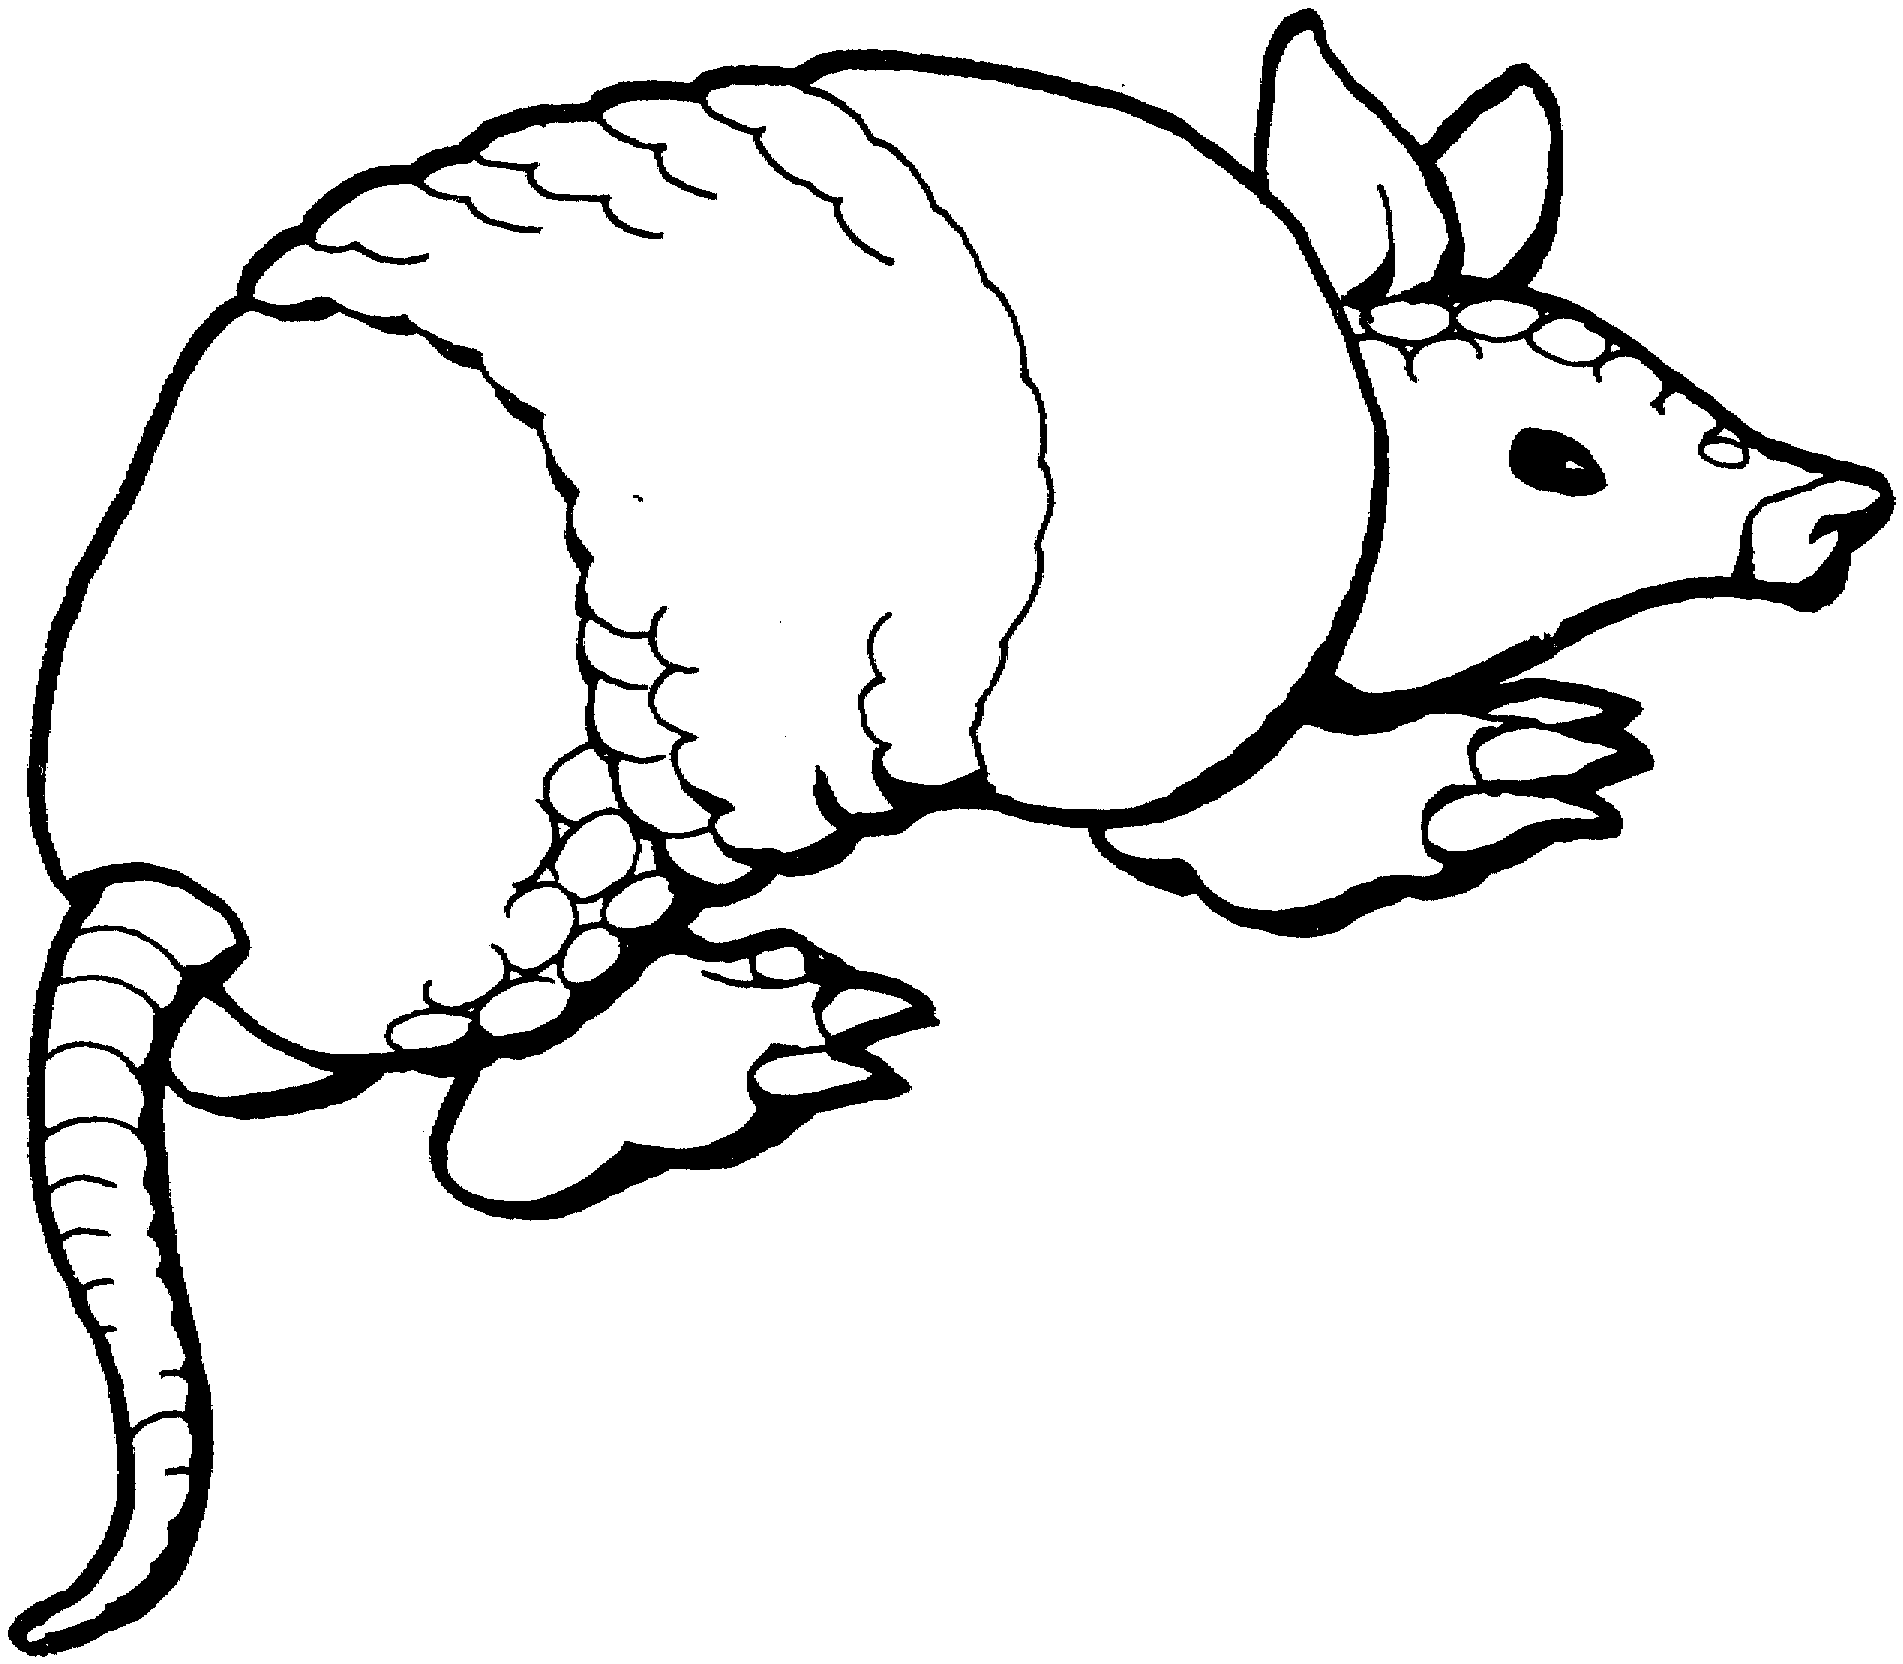 Armadillo Coloring Pages free of armadillos Printable Coloring4free